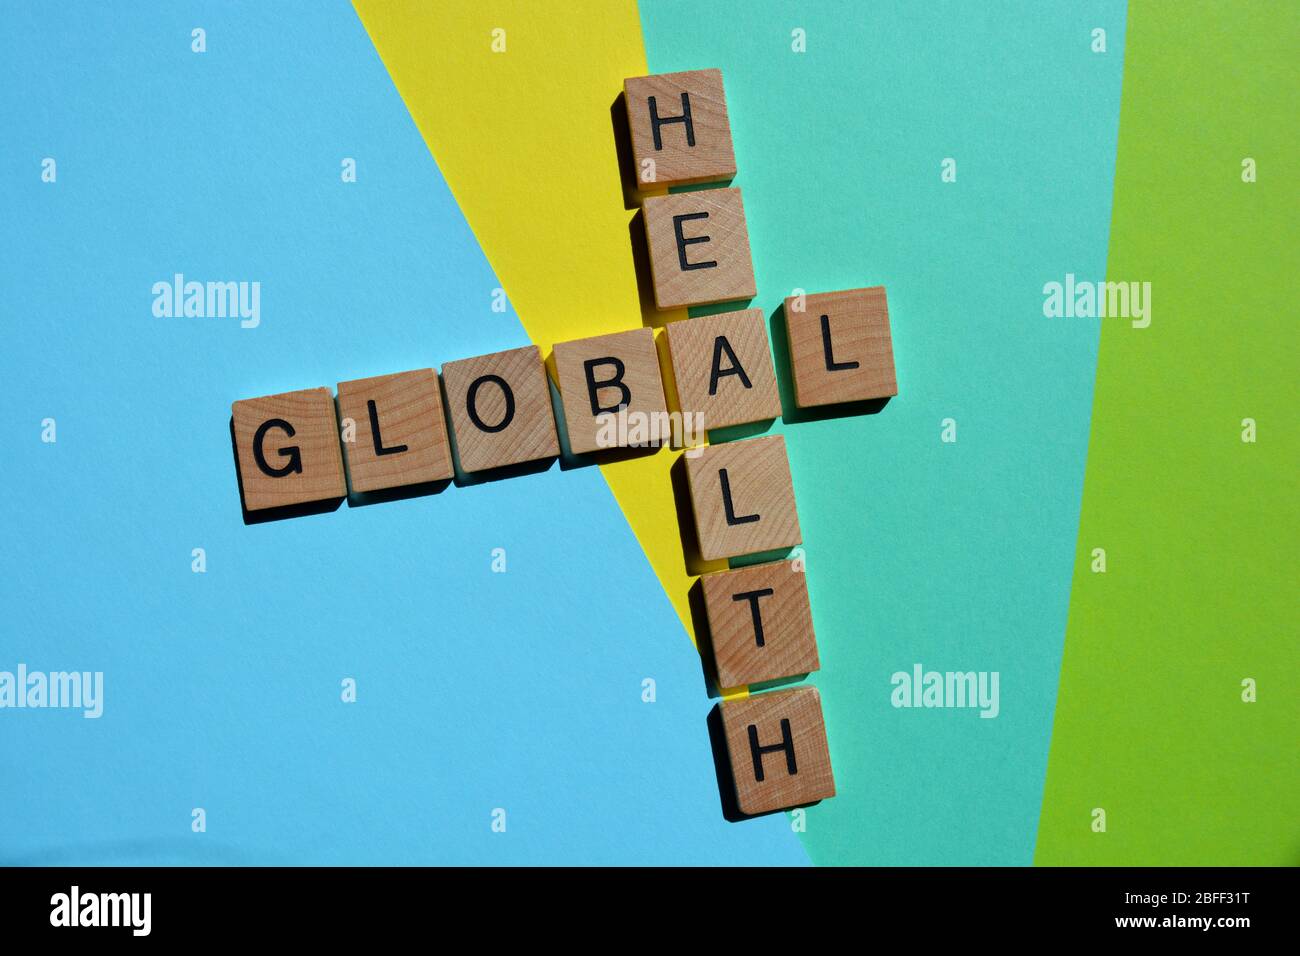 Global, Health, words in 3d wooden alphabet letters in a crossword isolated on colourful background Stock Photo